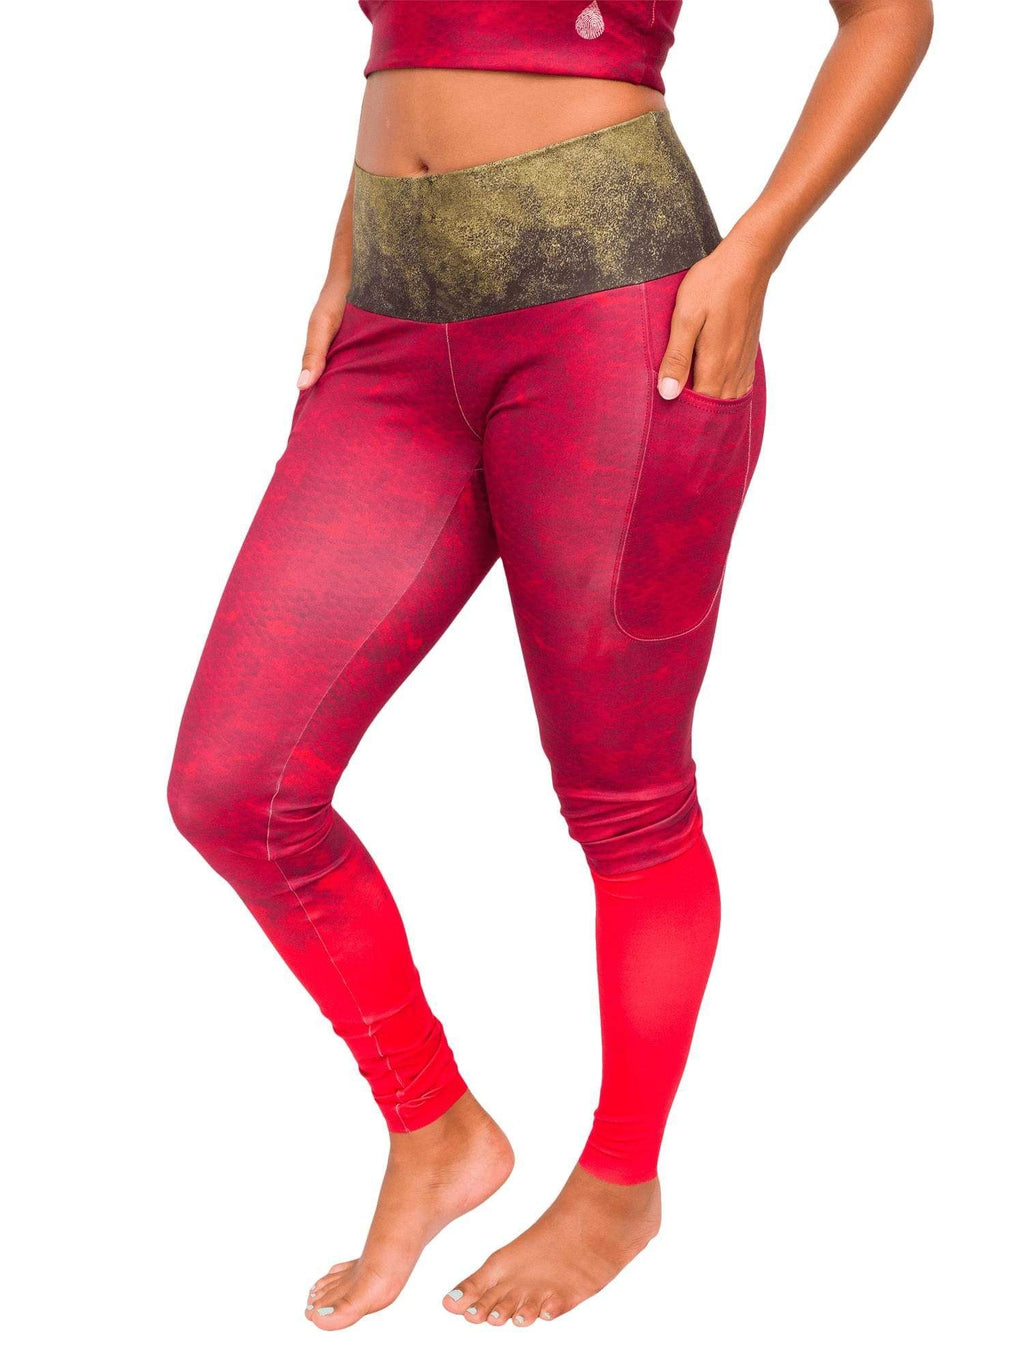 Salmon Sisters - What makes these leggings our new